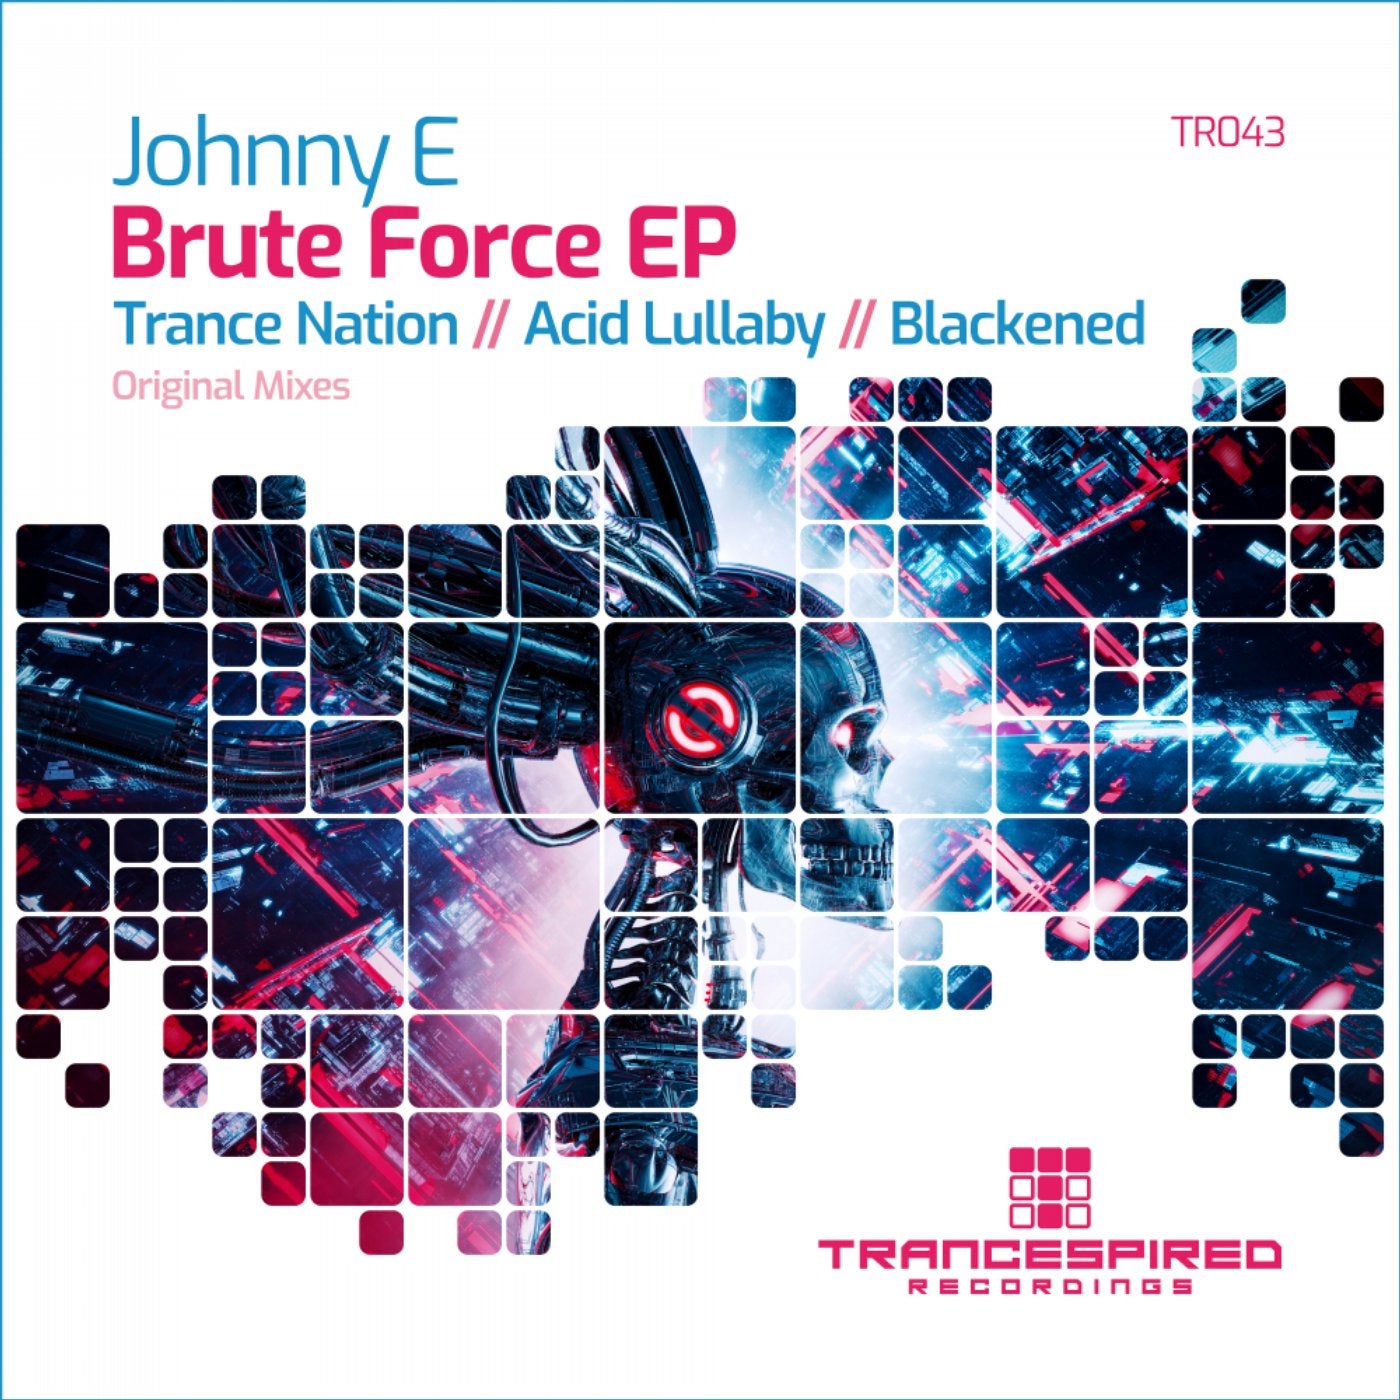 Brute Force EP